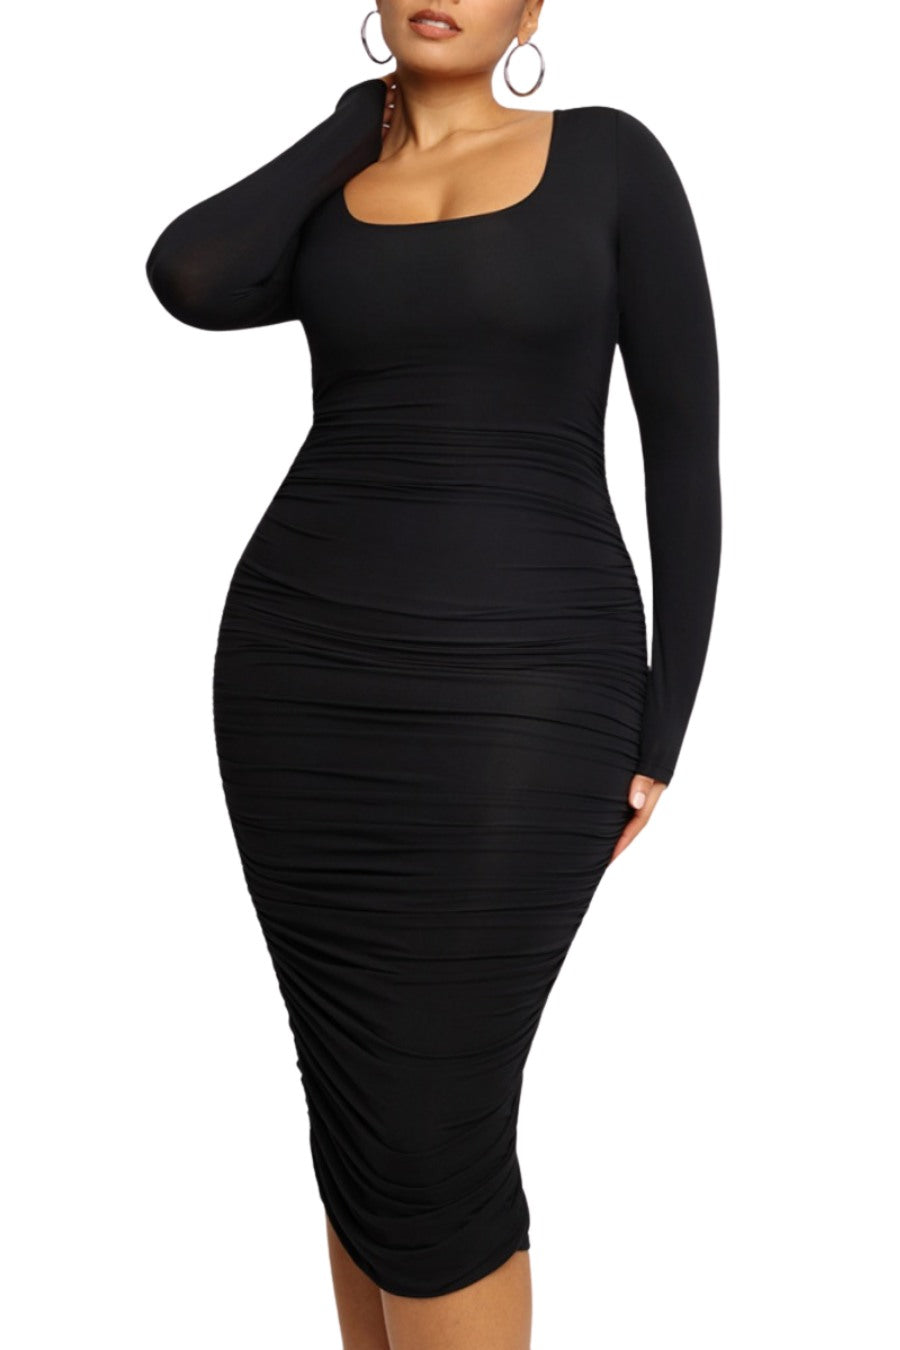 Built in SHAPEWEAR clothing for the win! I love this option